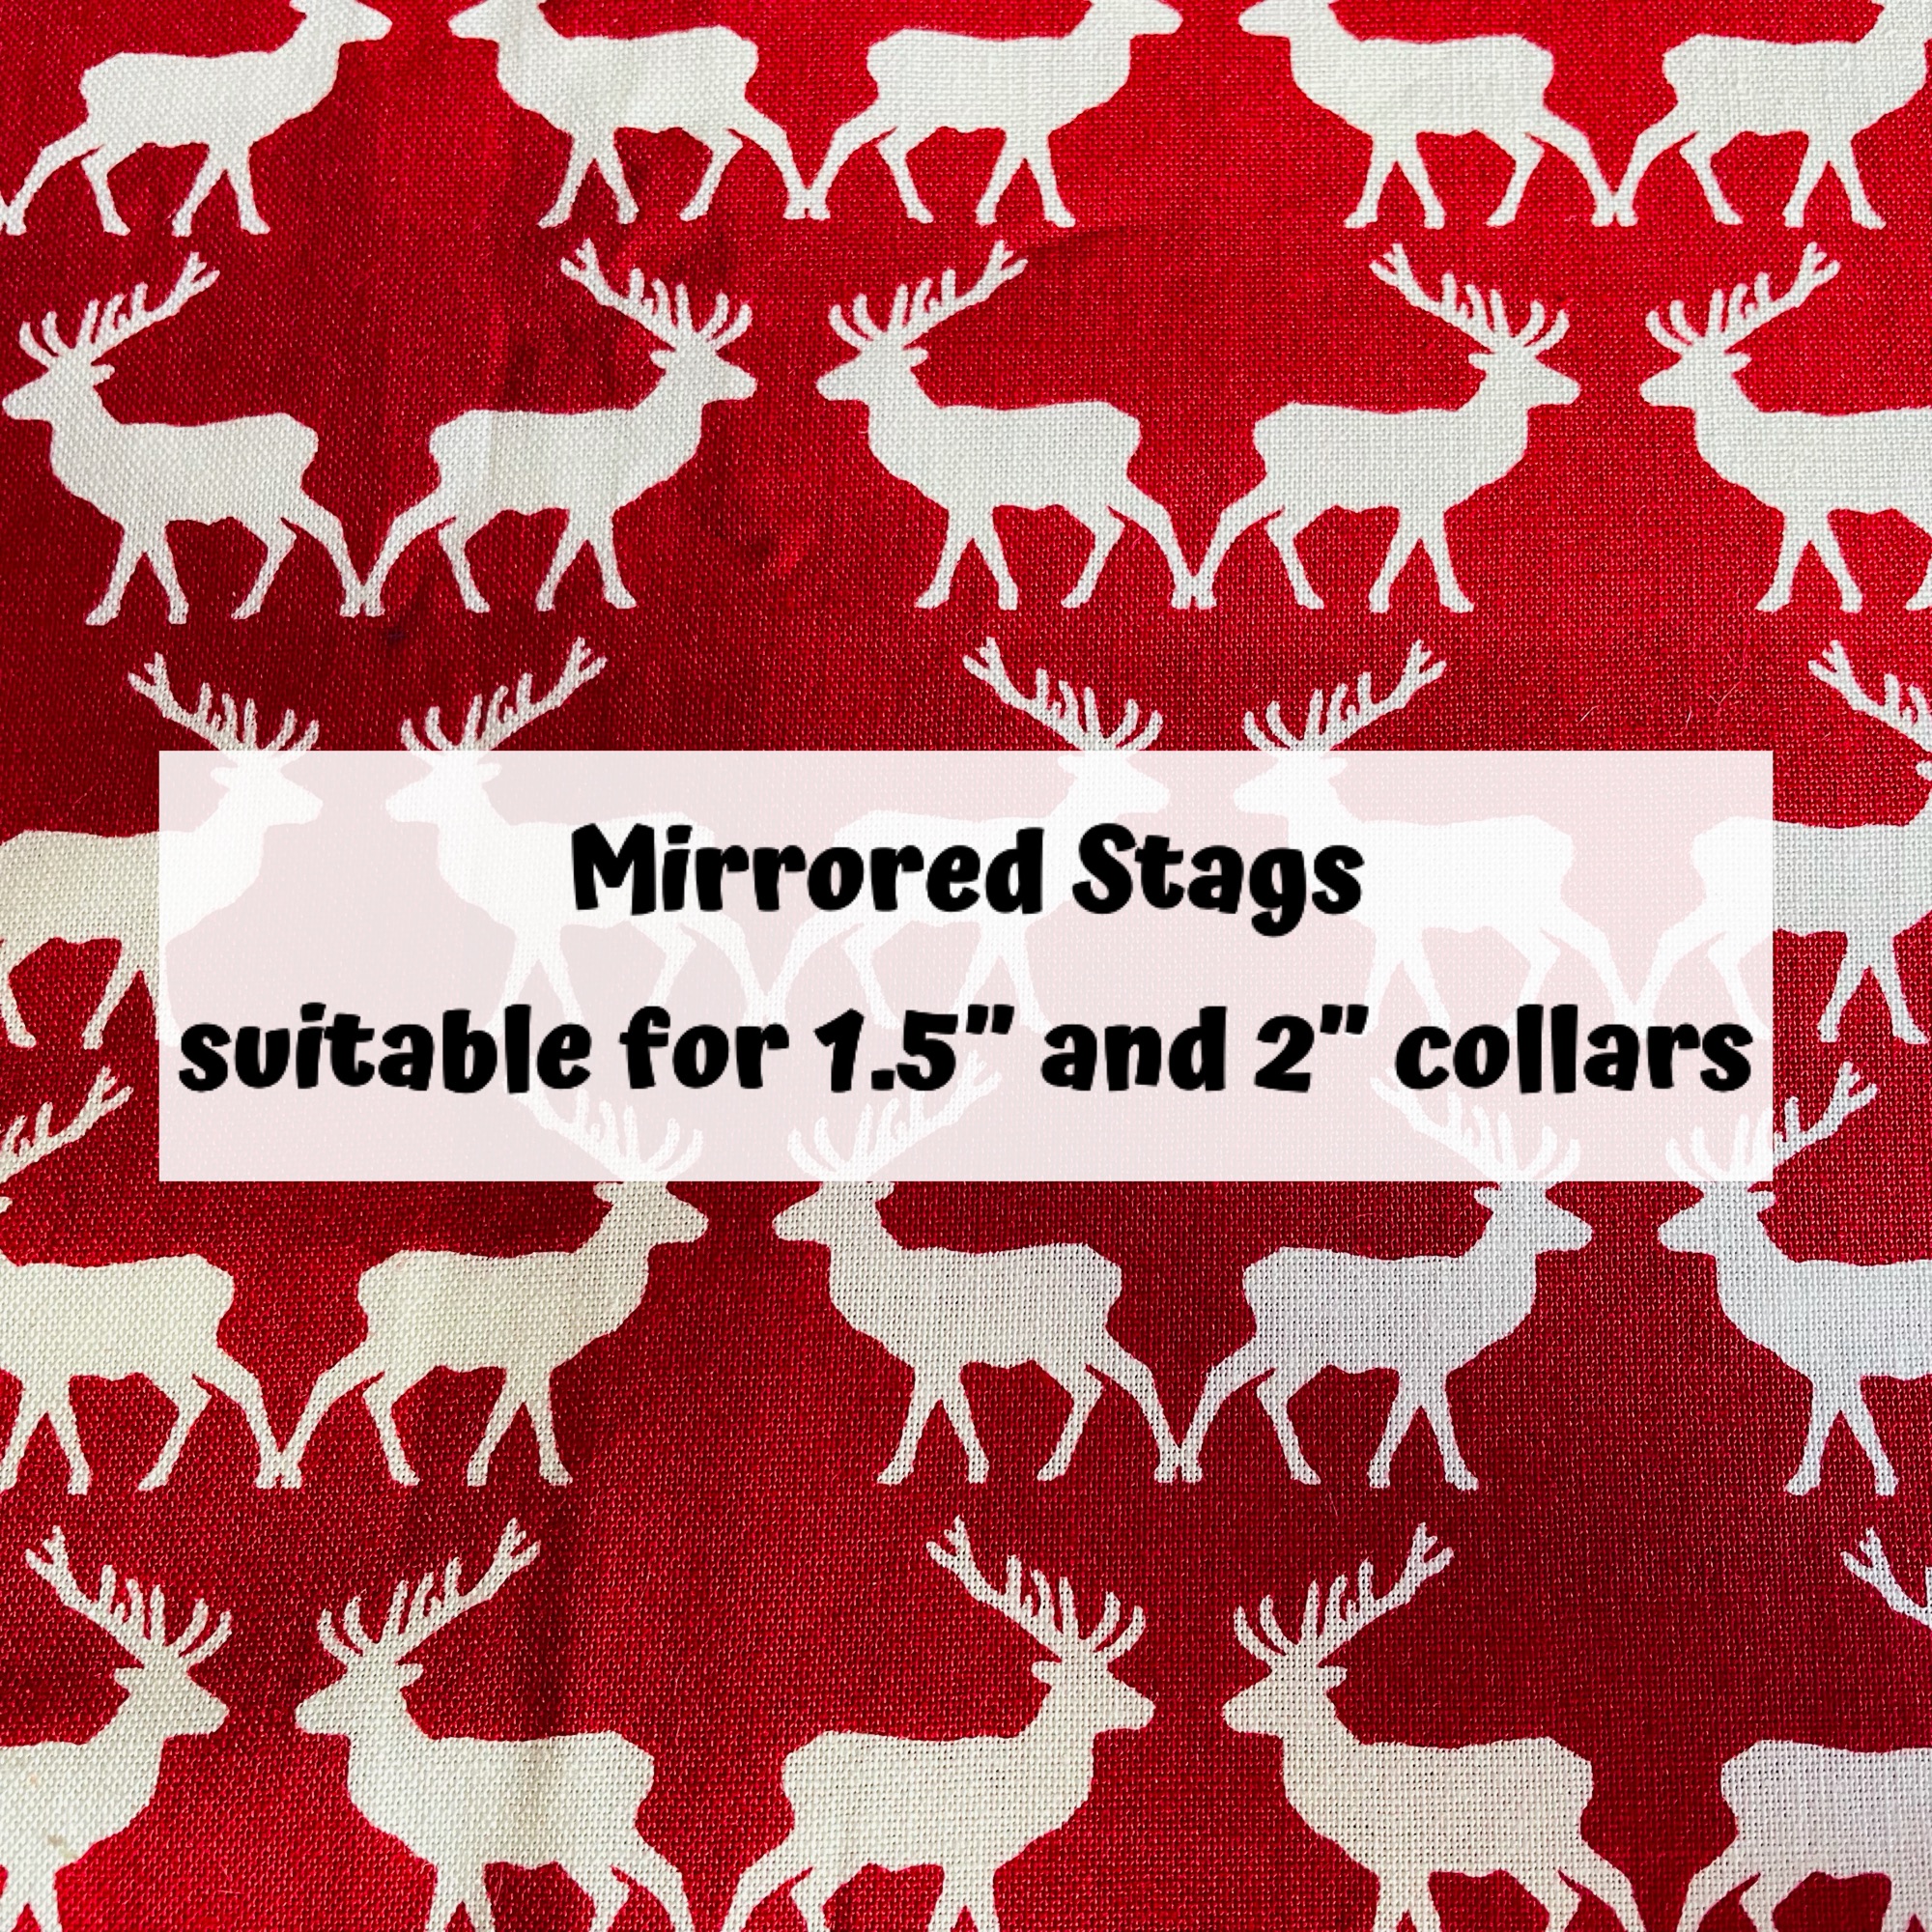 Mirrored Stags